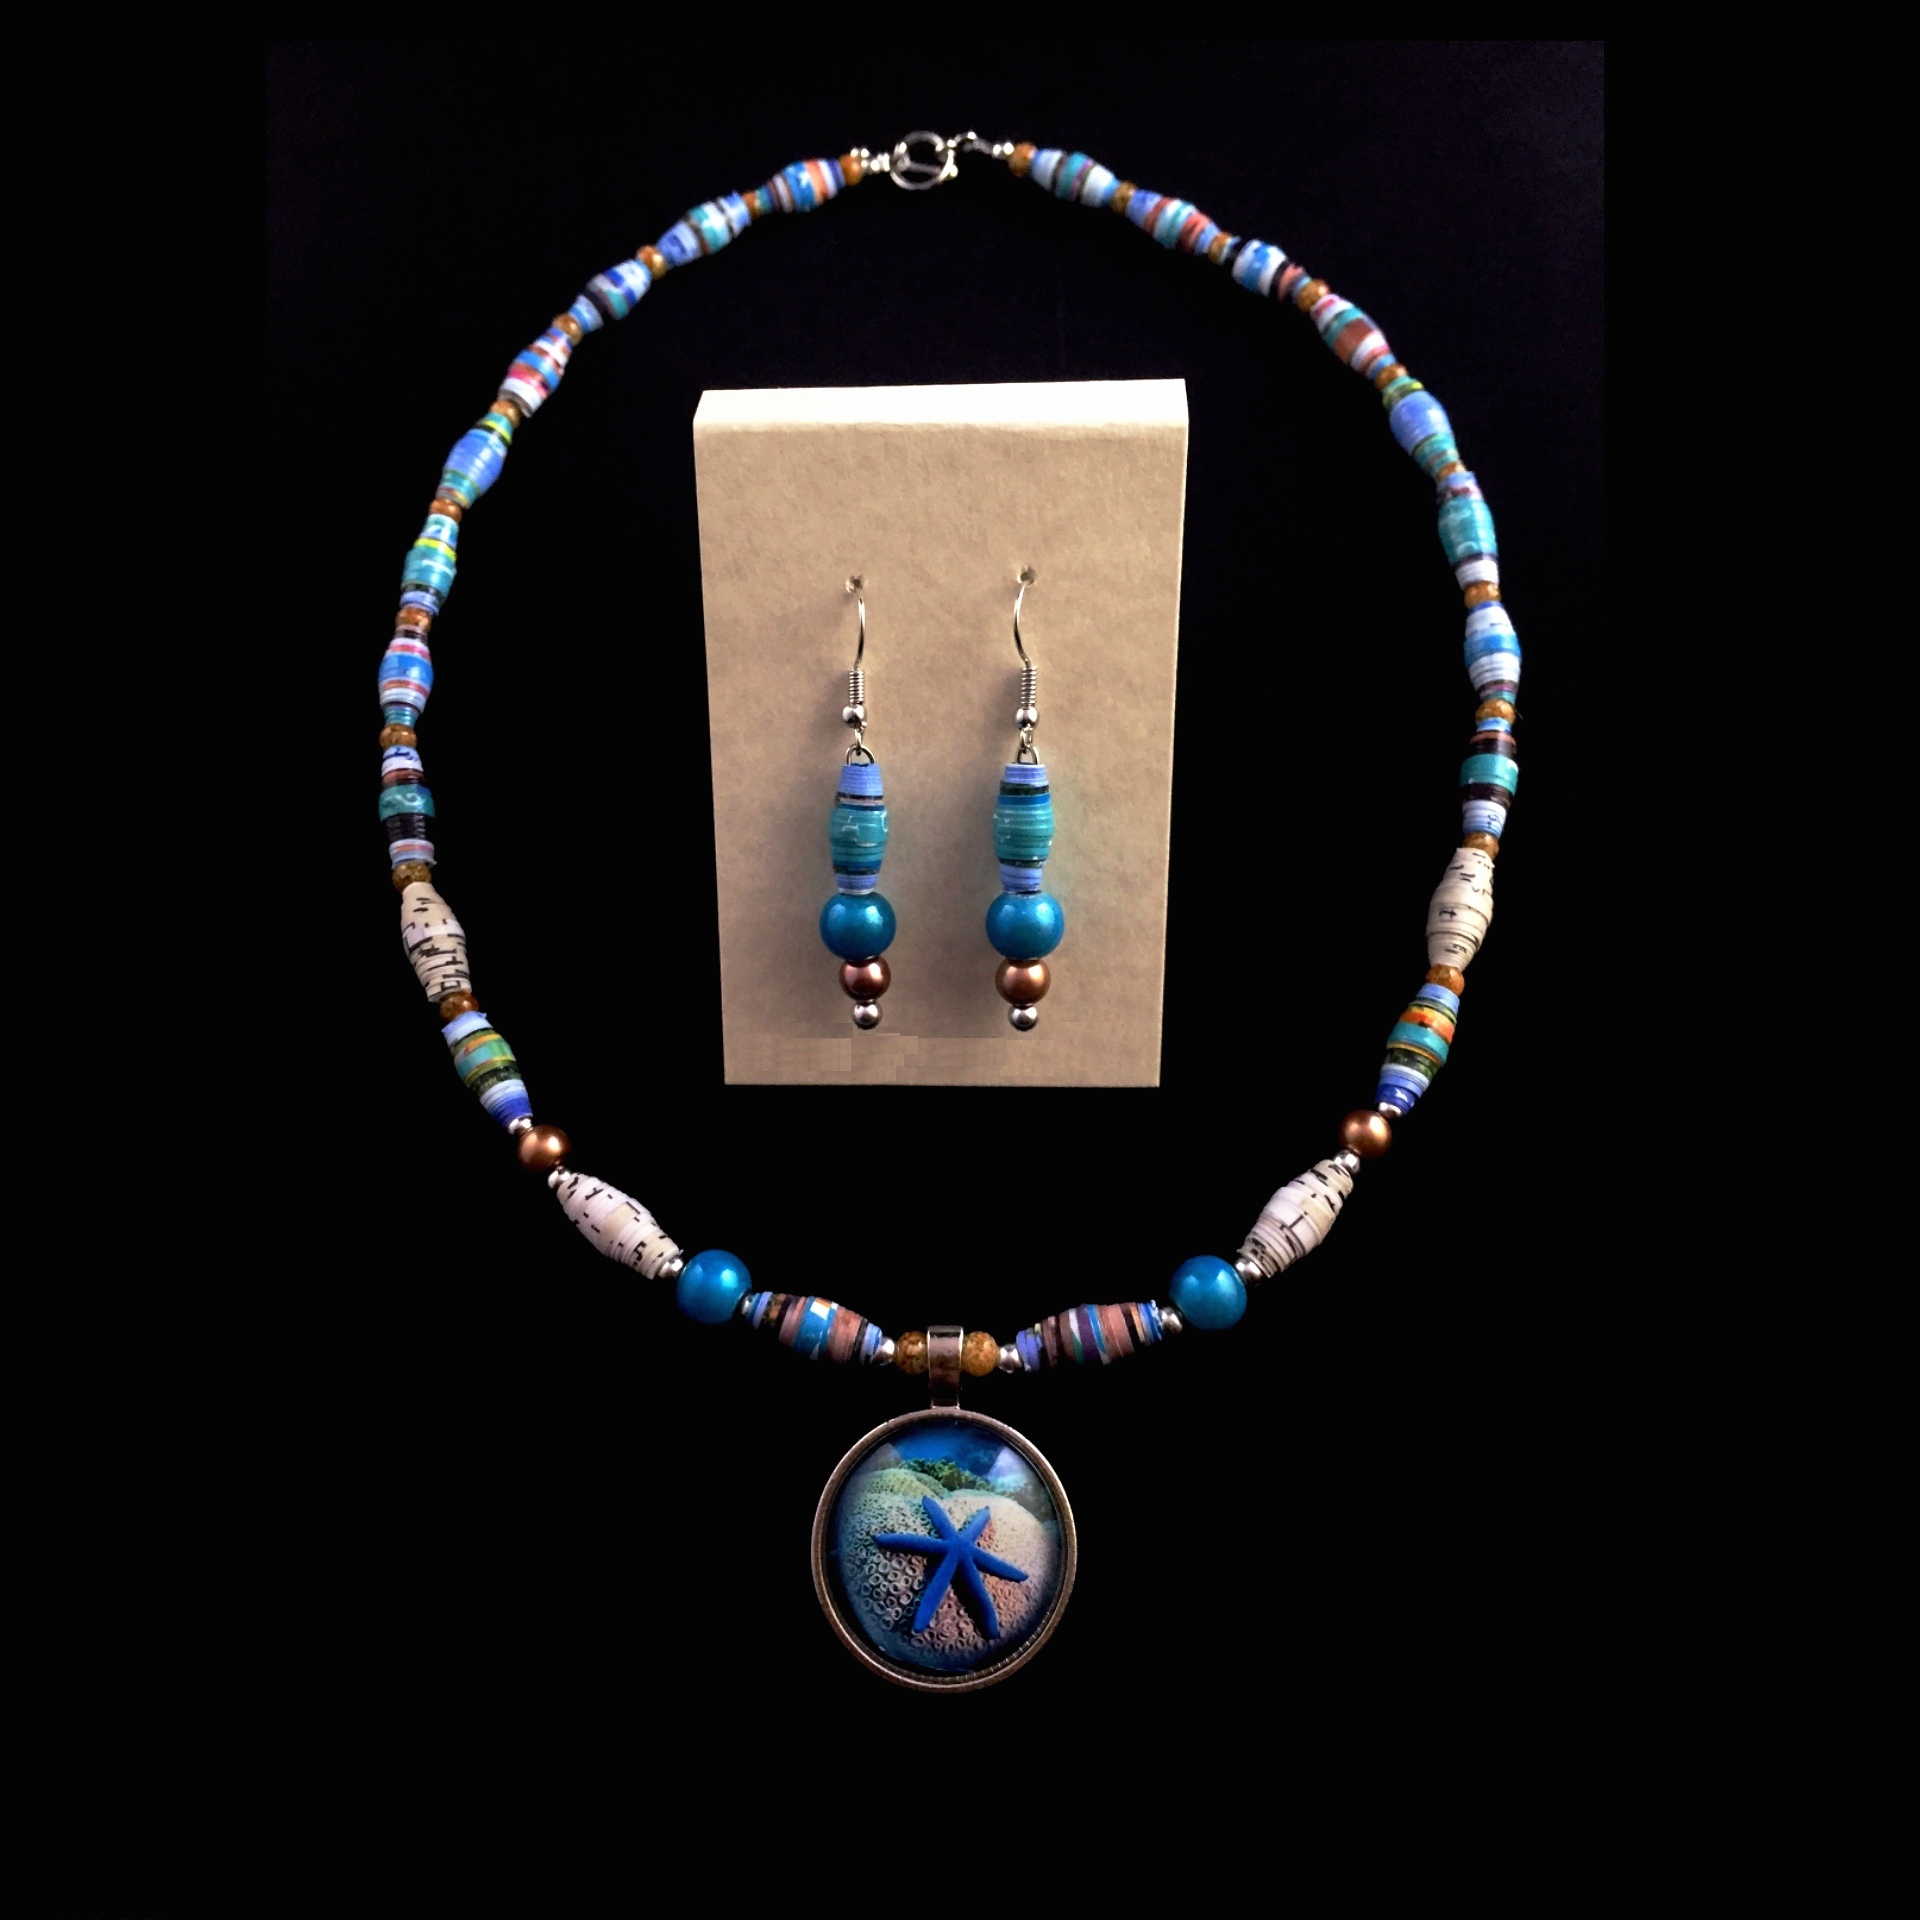 Necklace and earring set that is a combination of blues and tans with a starfish on the pendant